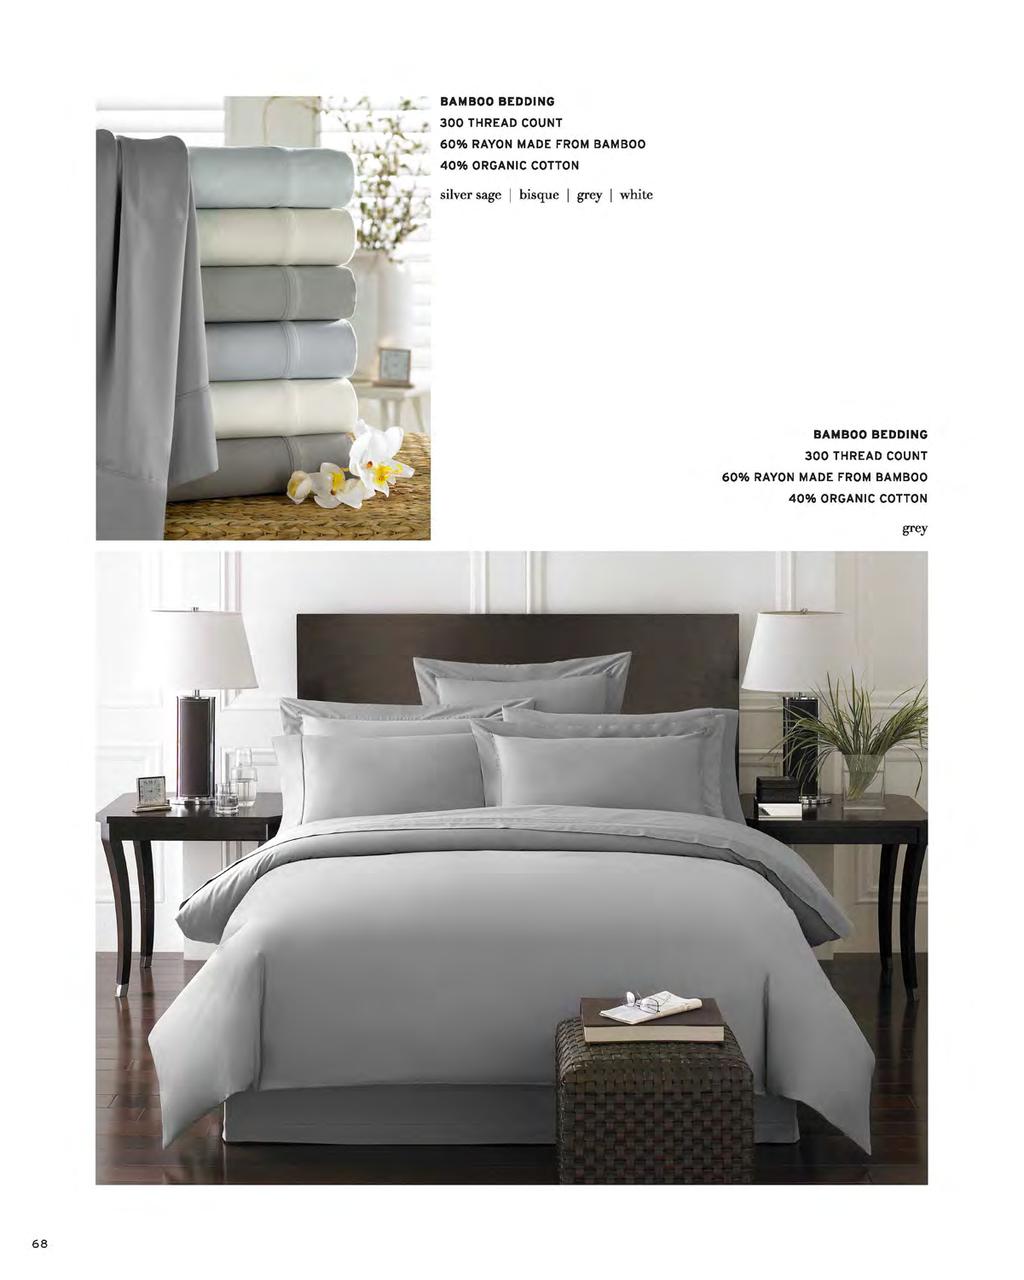 BAMBOO BEDDING 300THREADCOUNT 60% RAYON MADE FROM BAMBOO 40% ORGANIC COTTON silver sage I bisque I